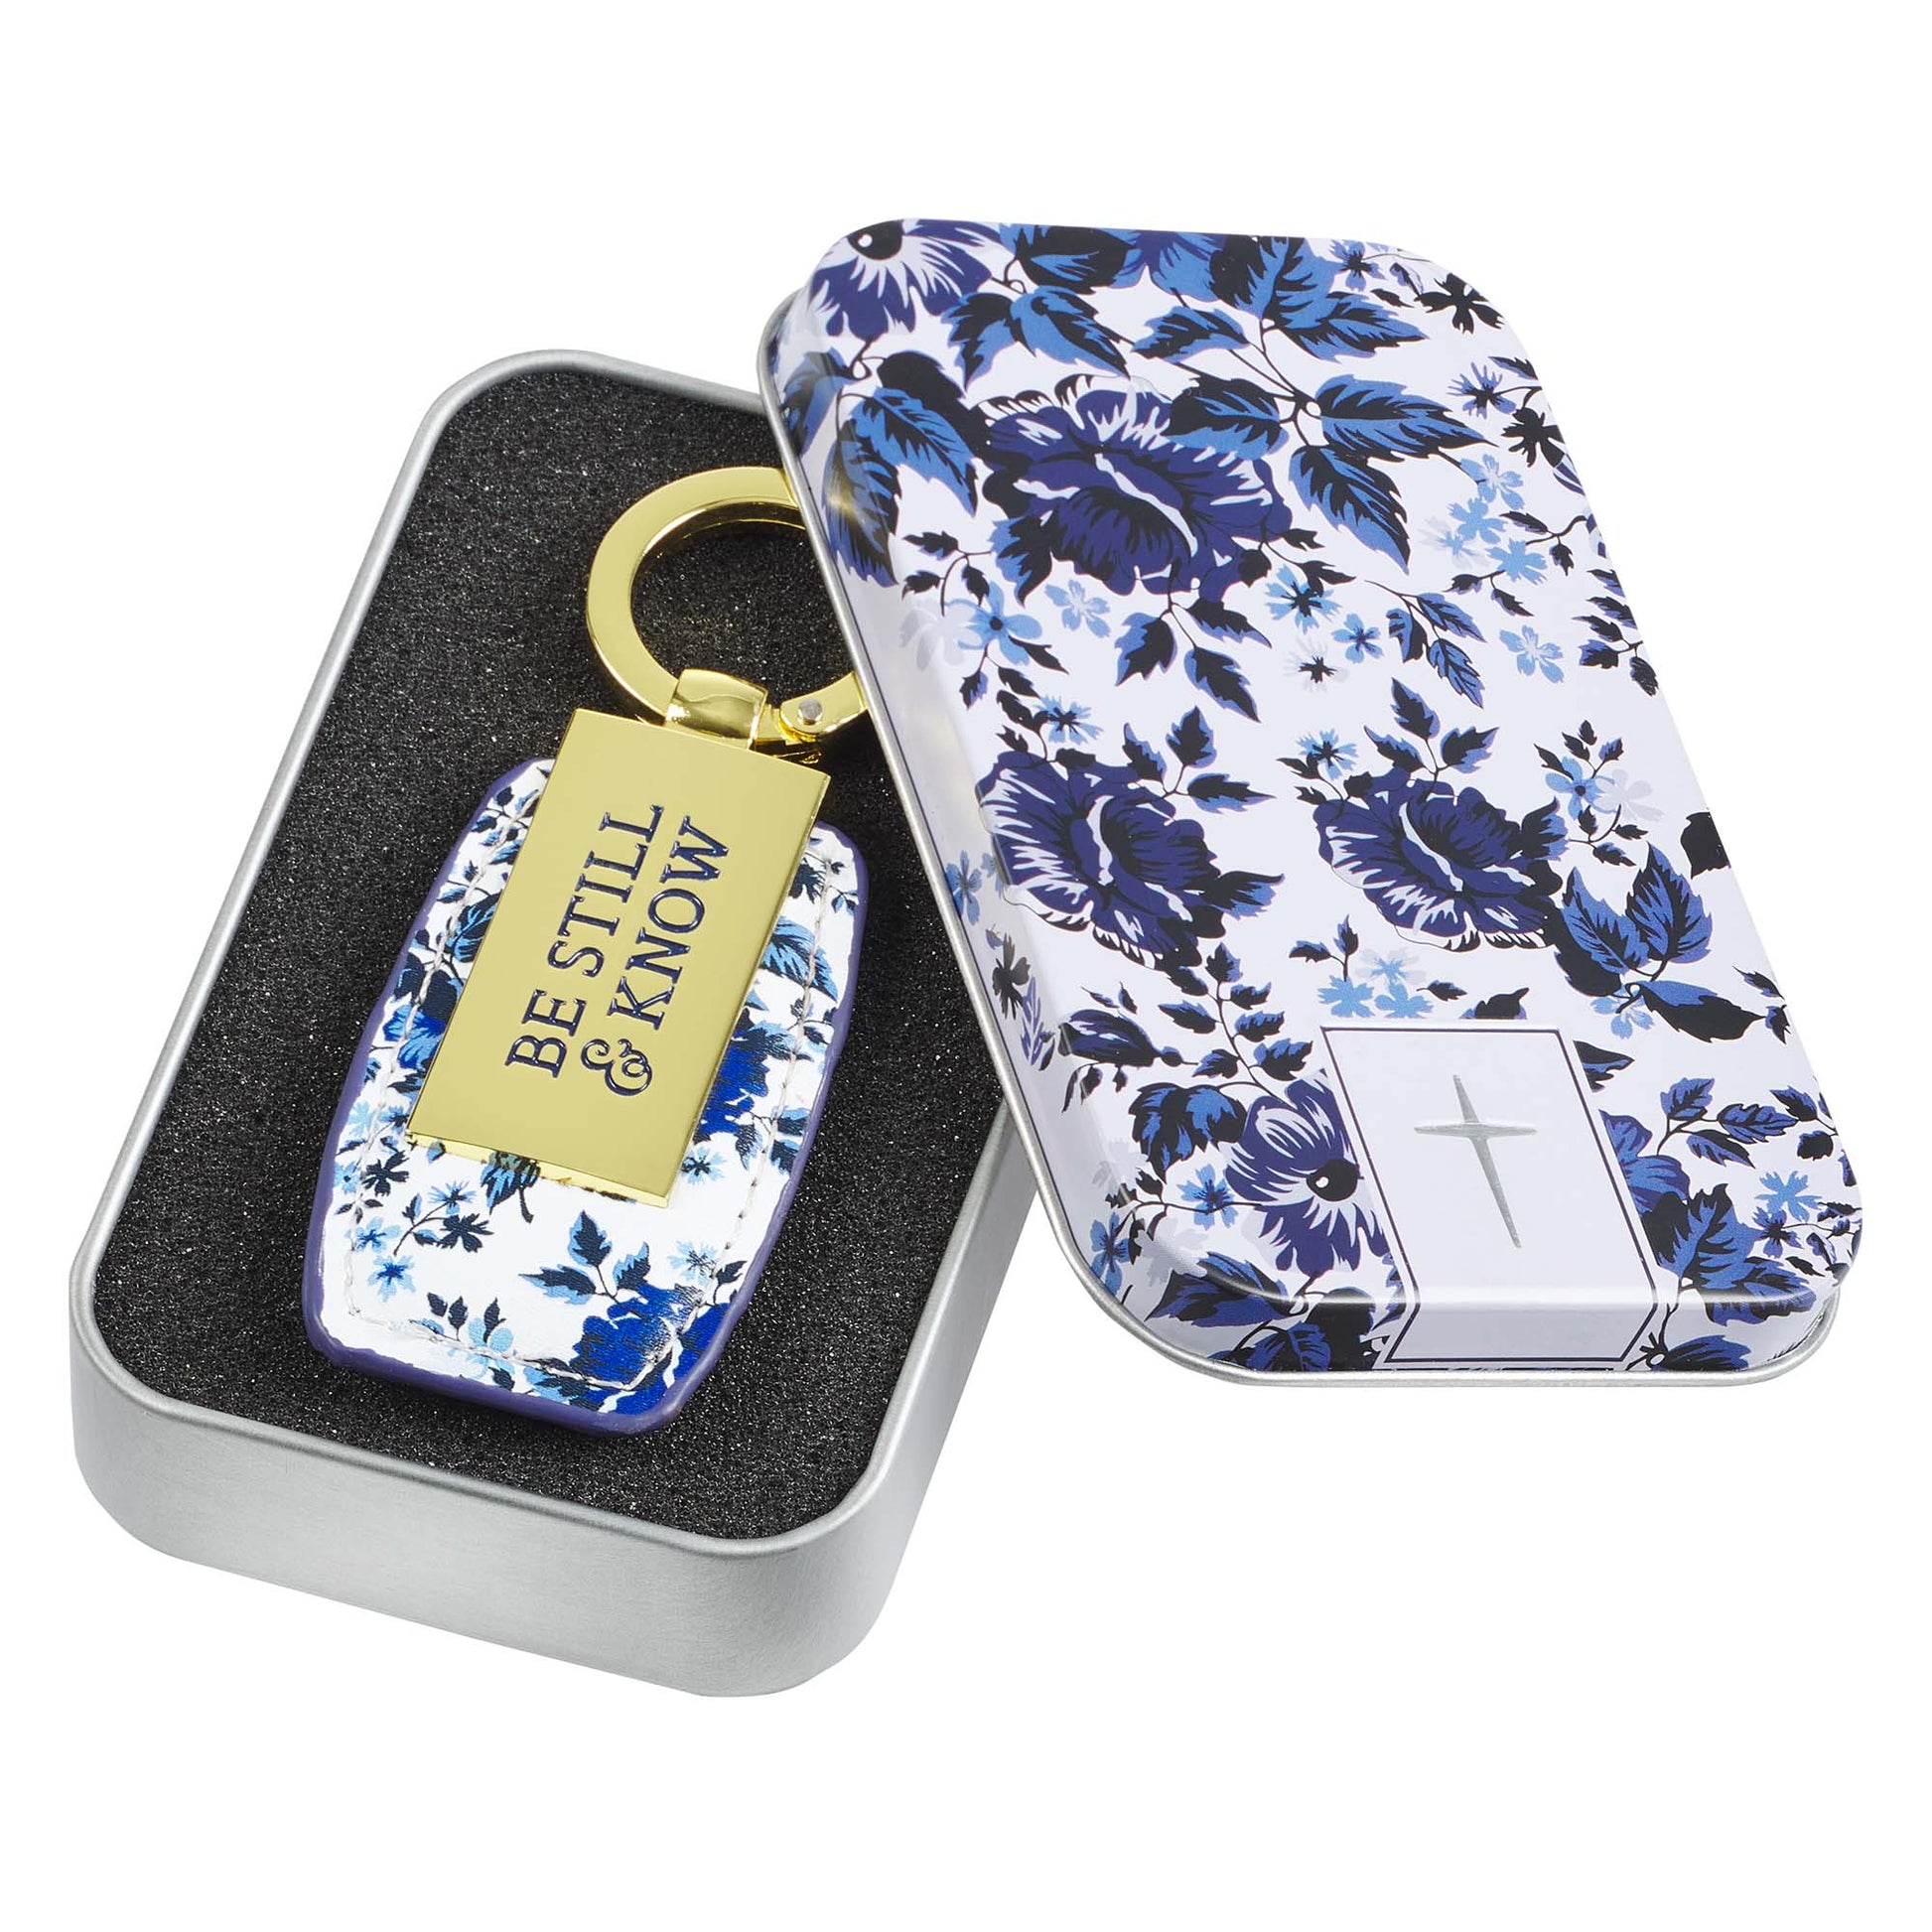 Be Still & Know Blue Floral Metal Key Ring in Gift Tin - Psalm 46:10 - The Christian Gift Company